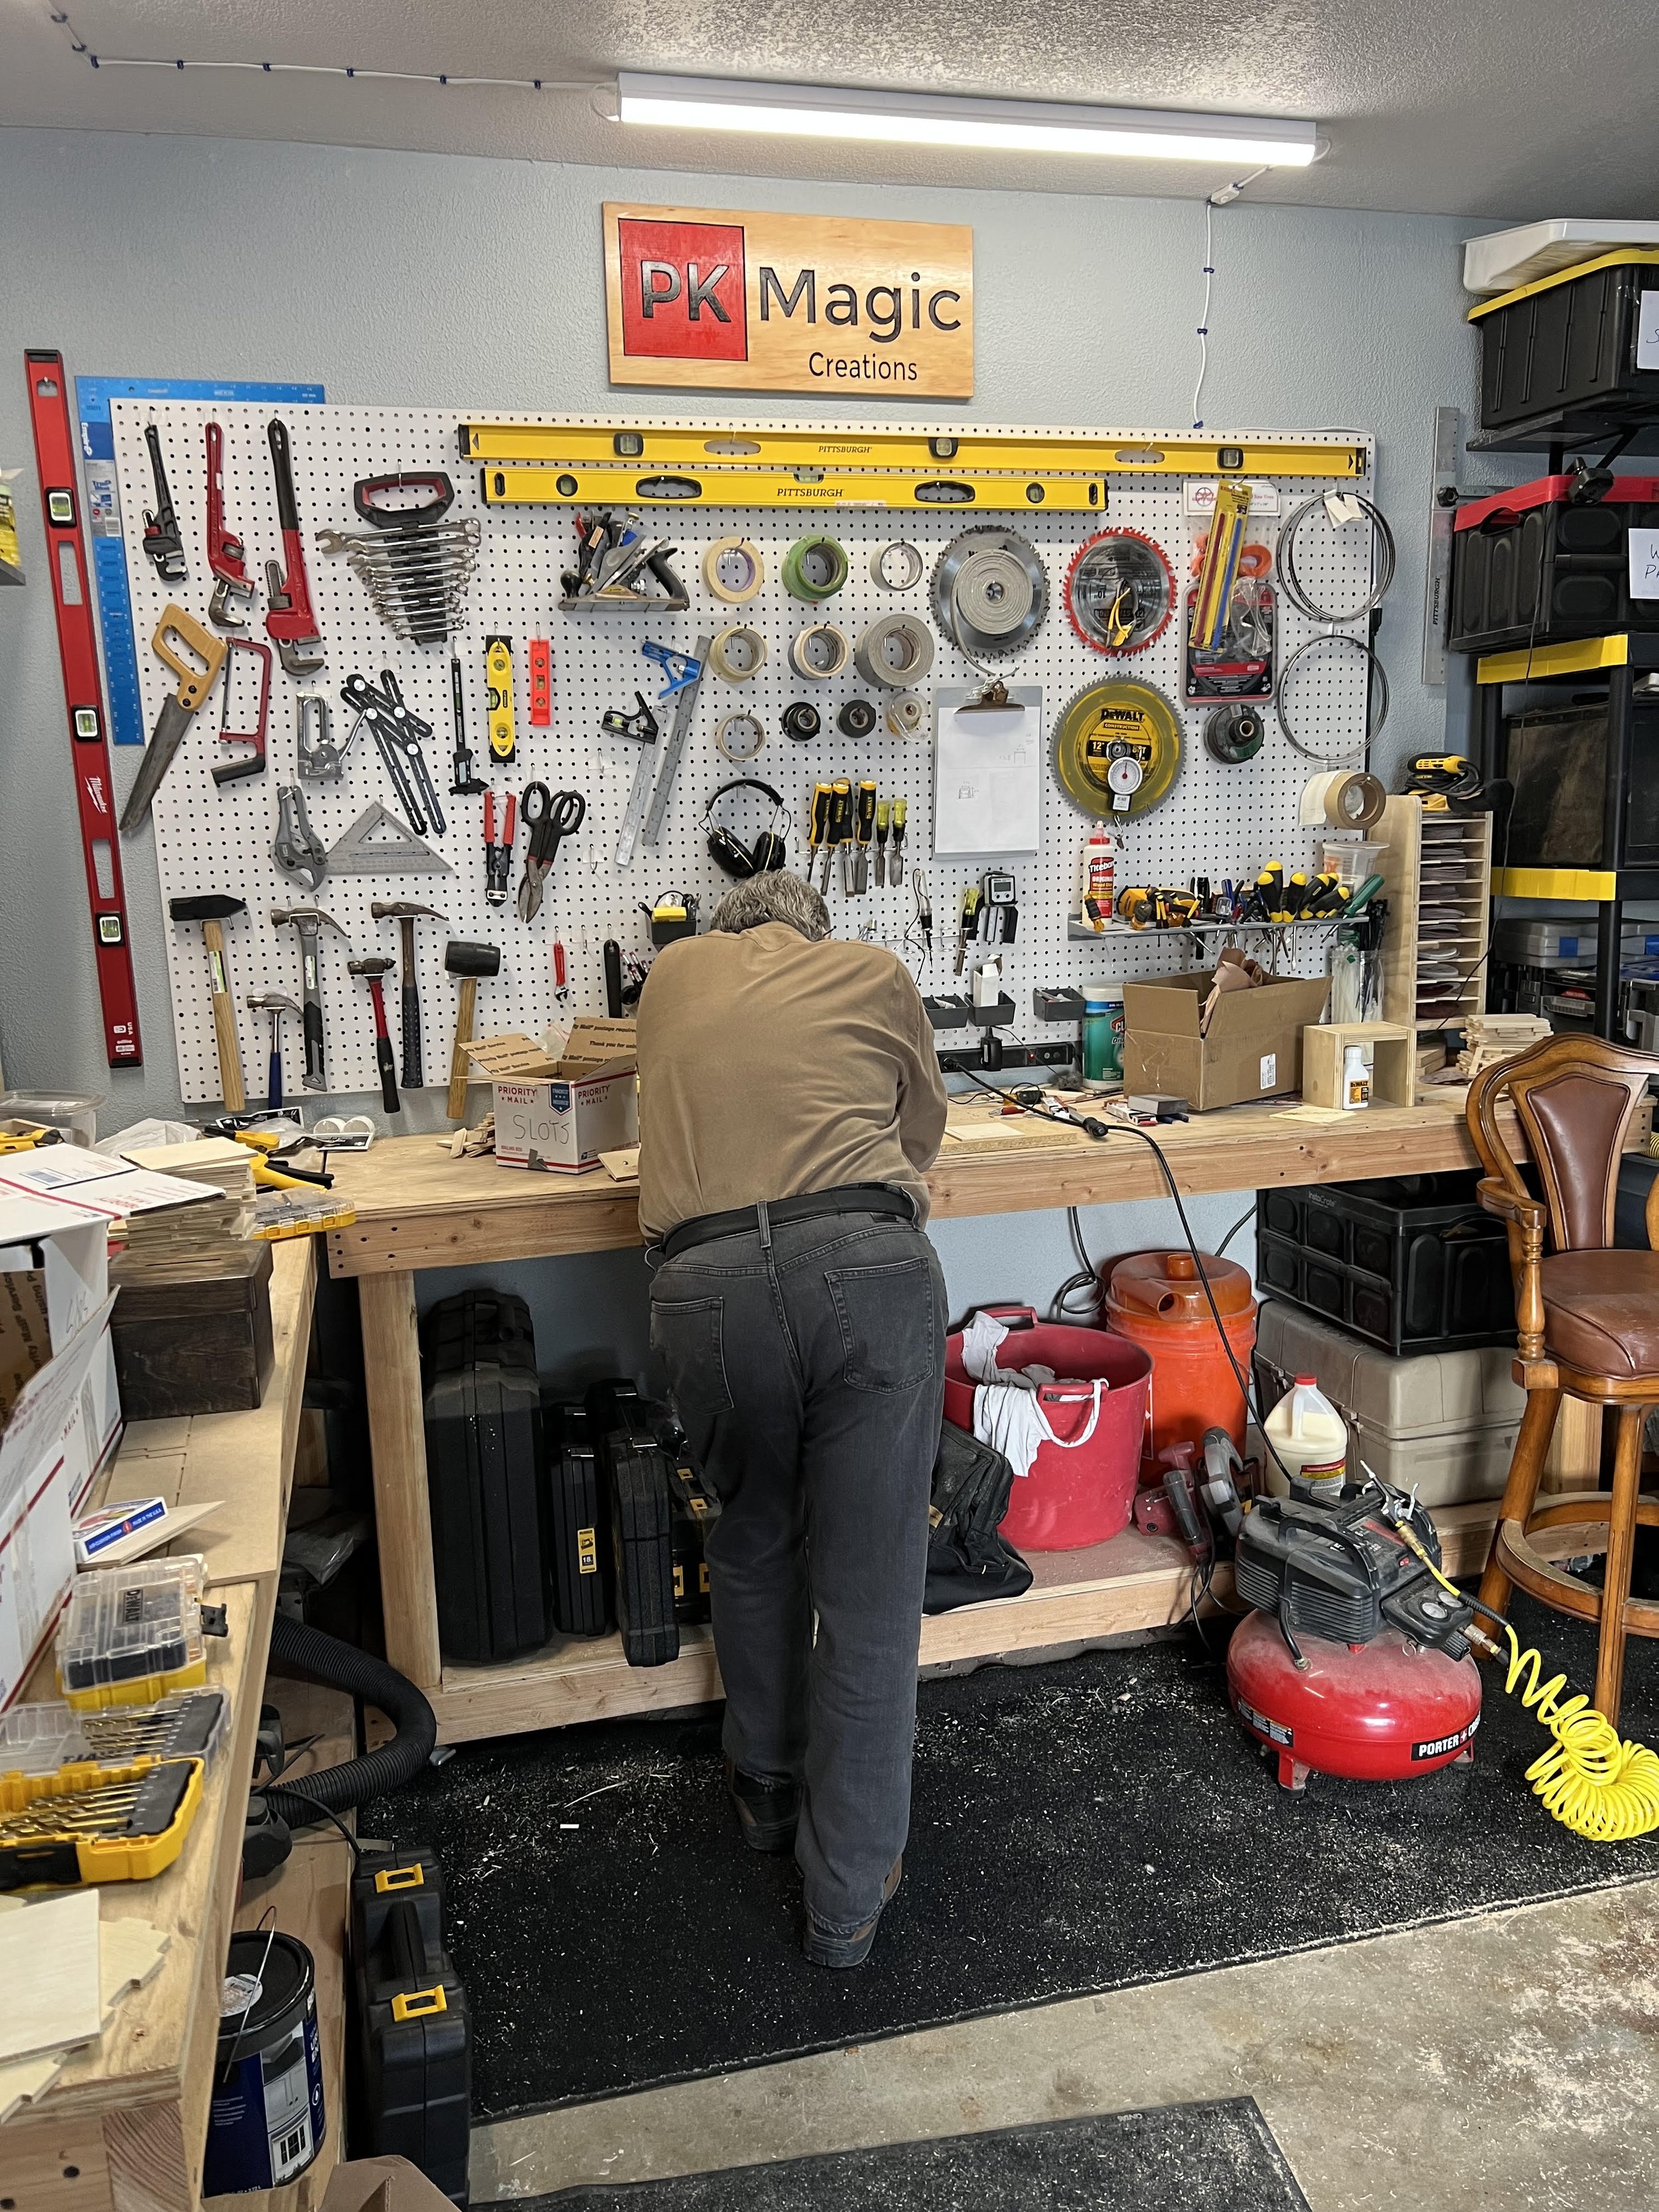 Patrick working out a solution at the PK Magic work bench